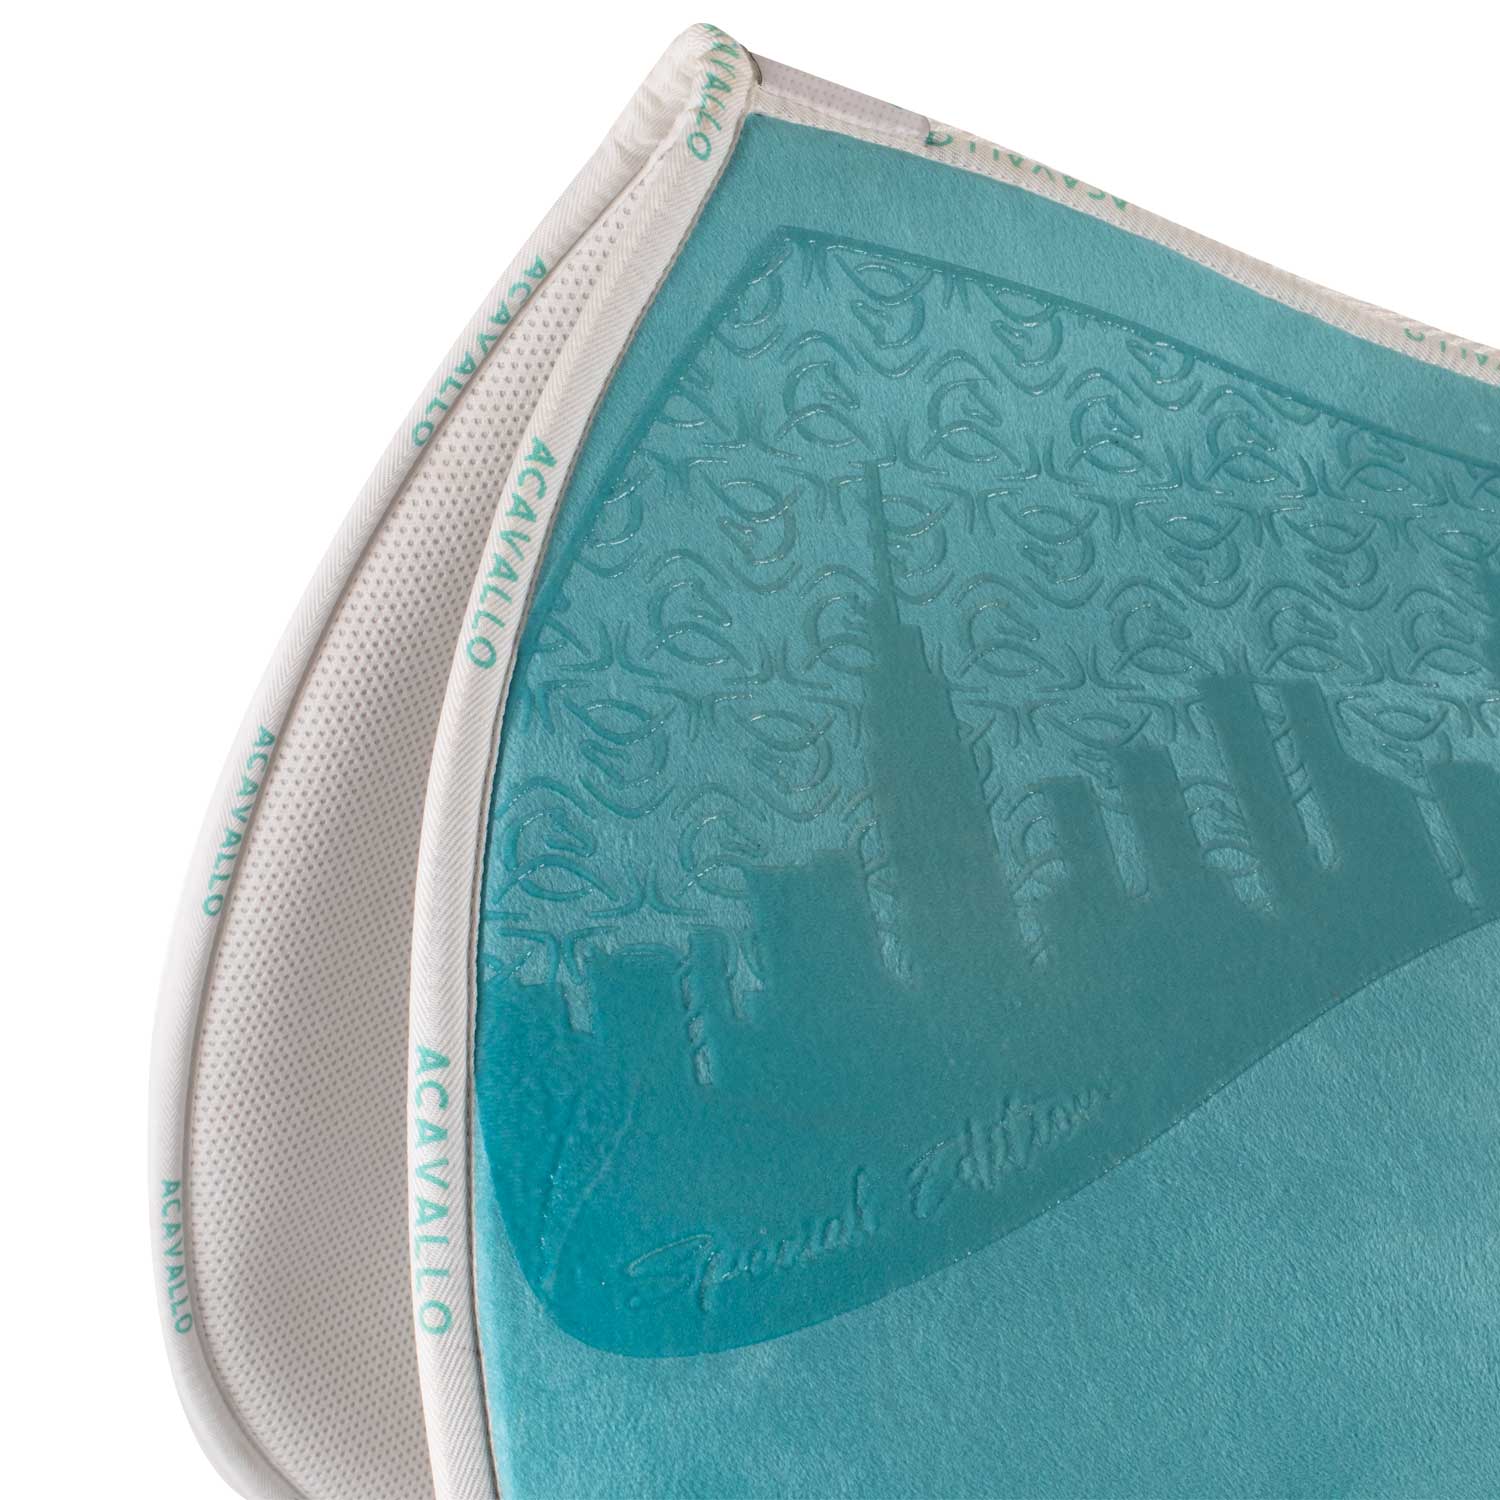 special edition acaavallo saddle pad